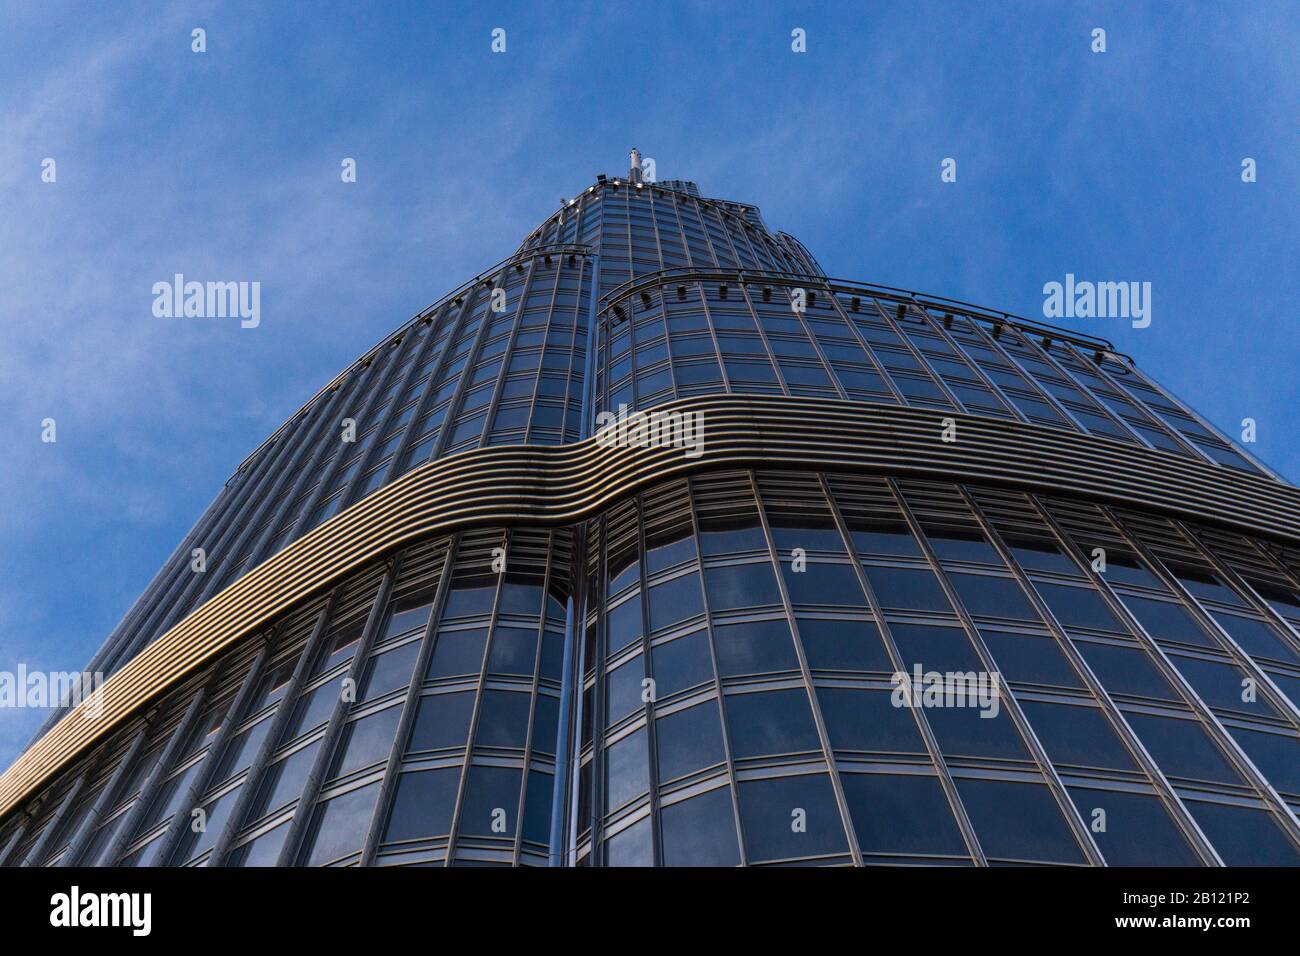 View of the Burj Khalifa from the base Stock Photo